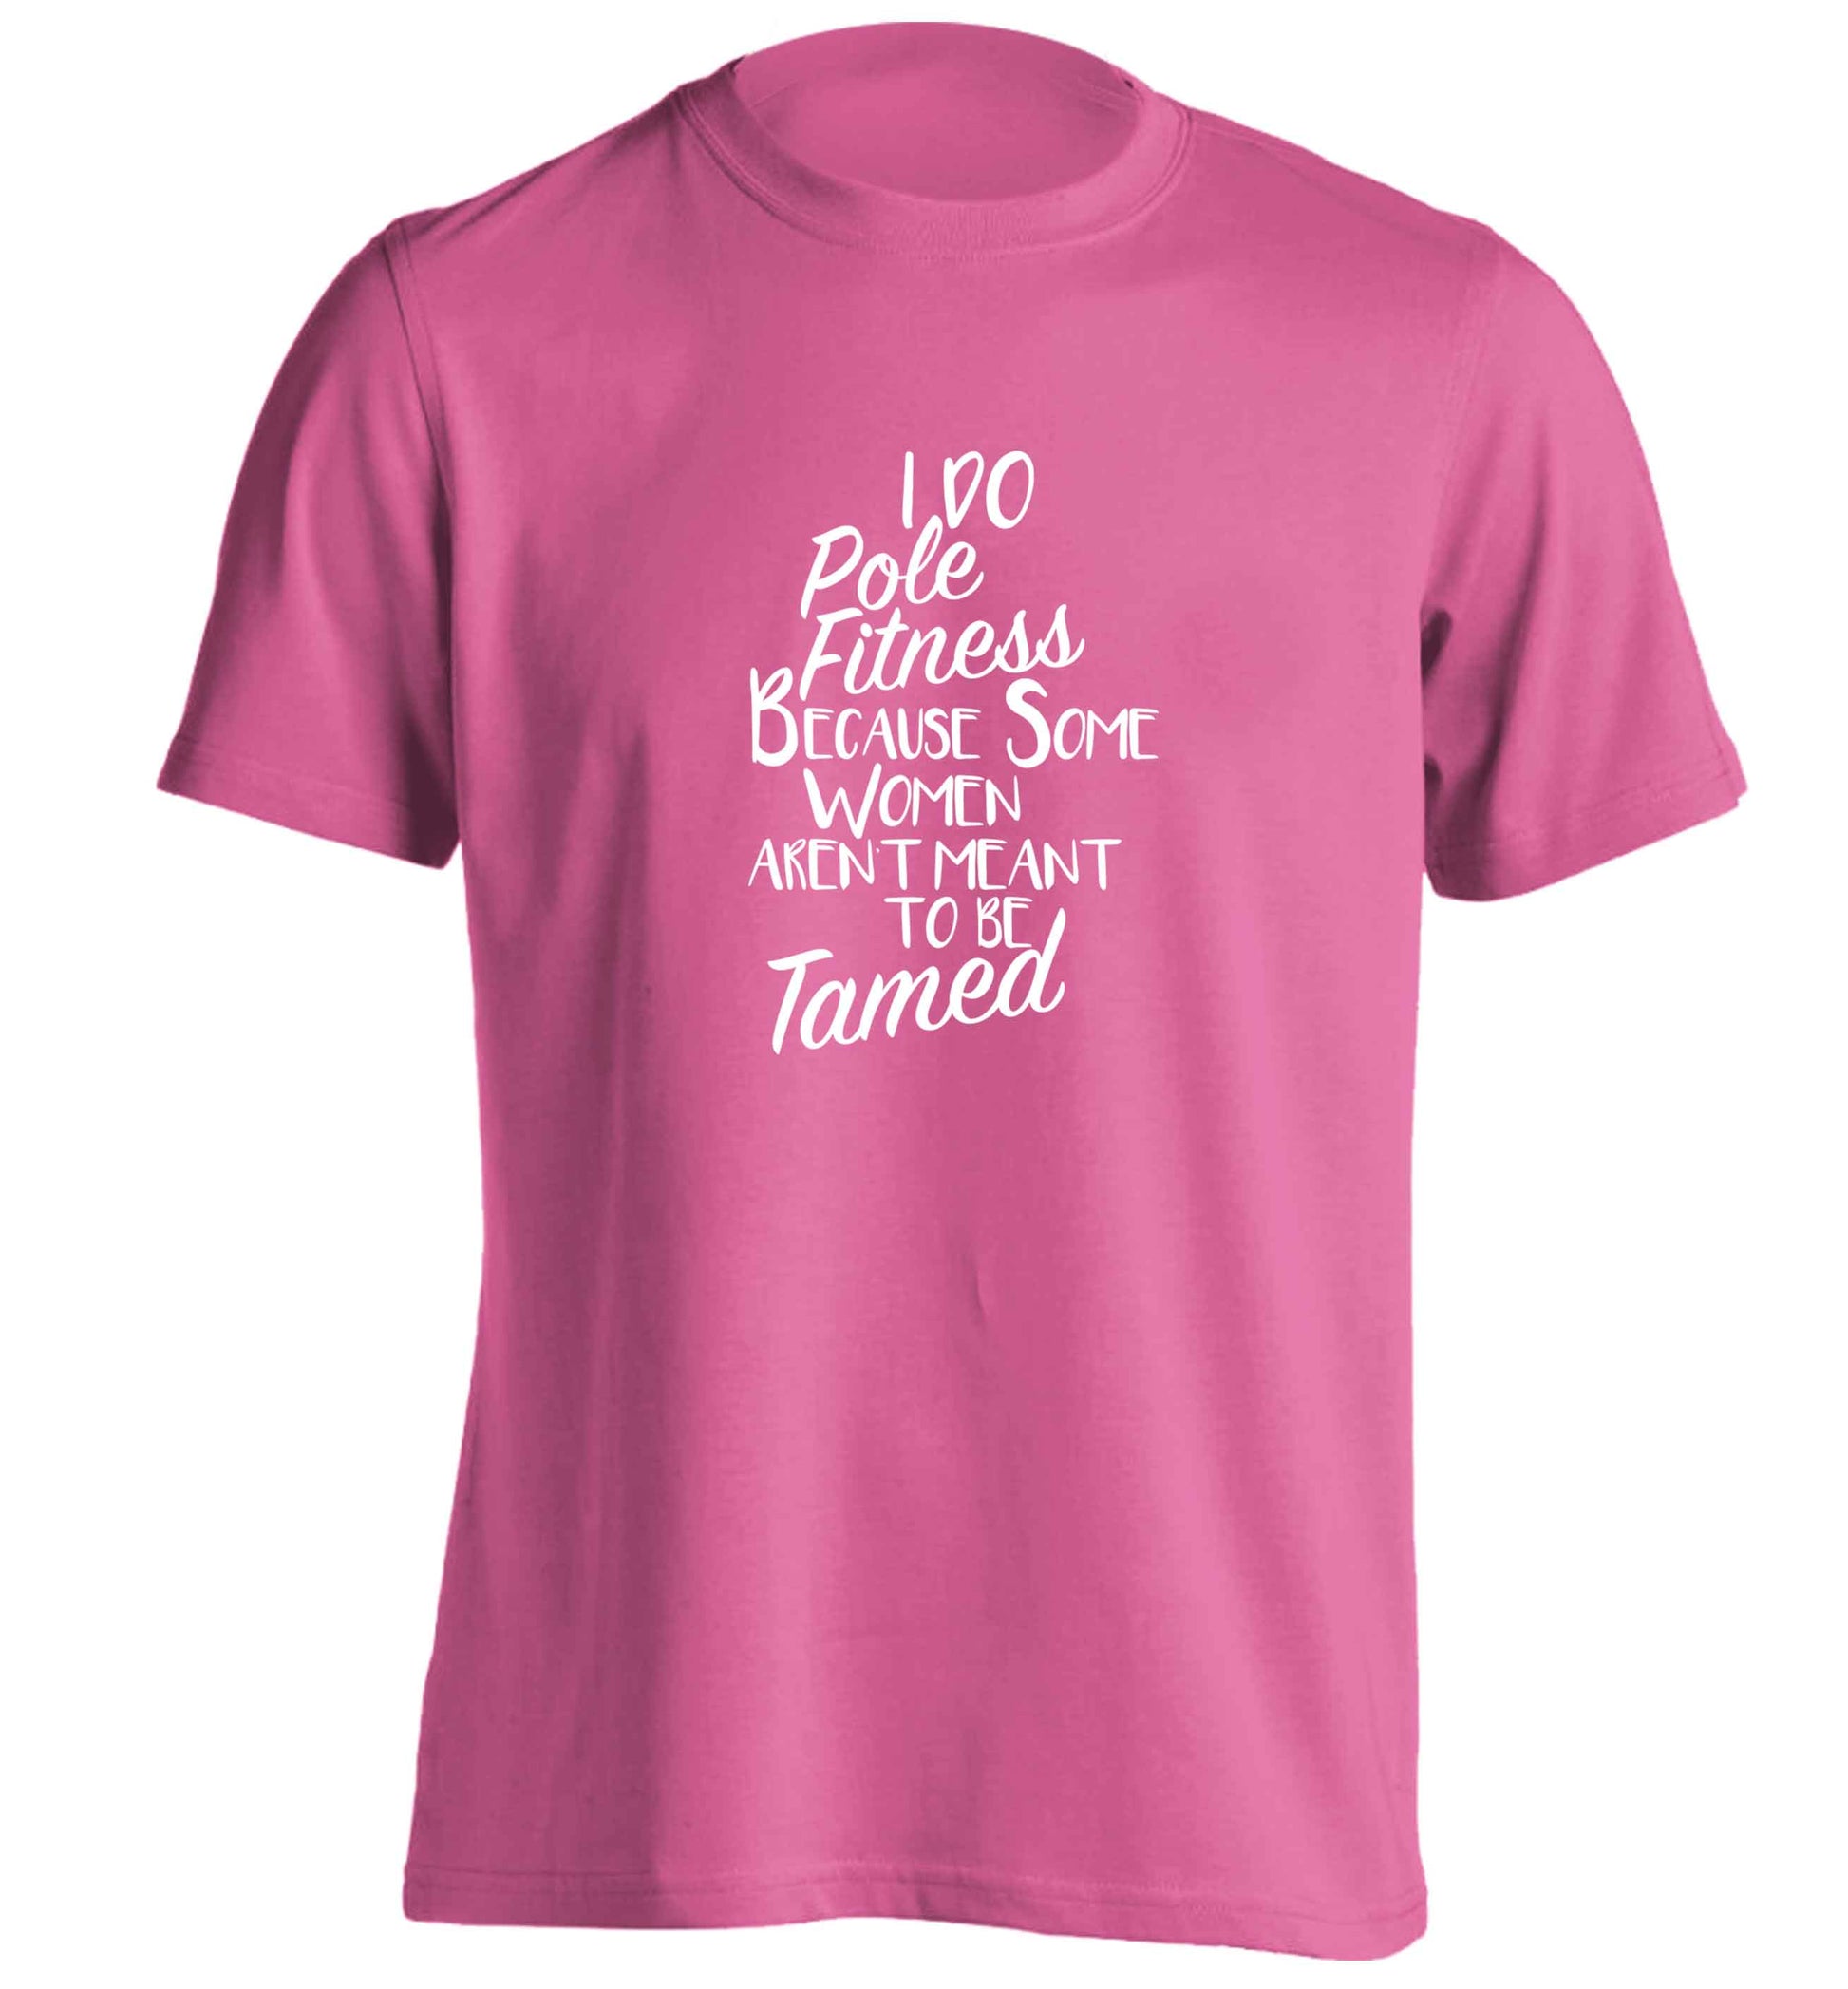 I do pole fitness because some women aren't meant to be tamed adults unisex pink Tshirt 2XL